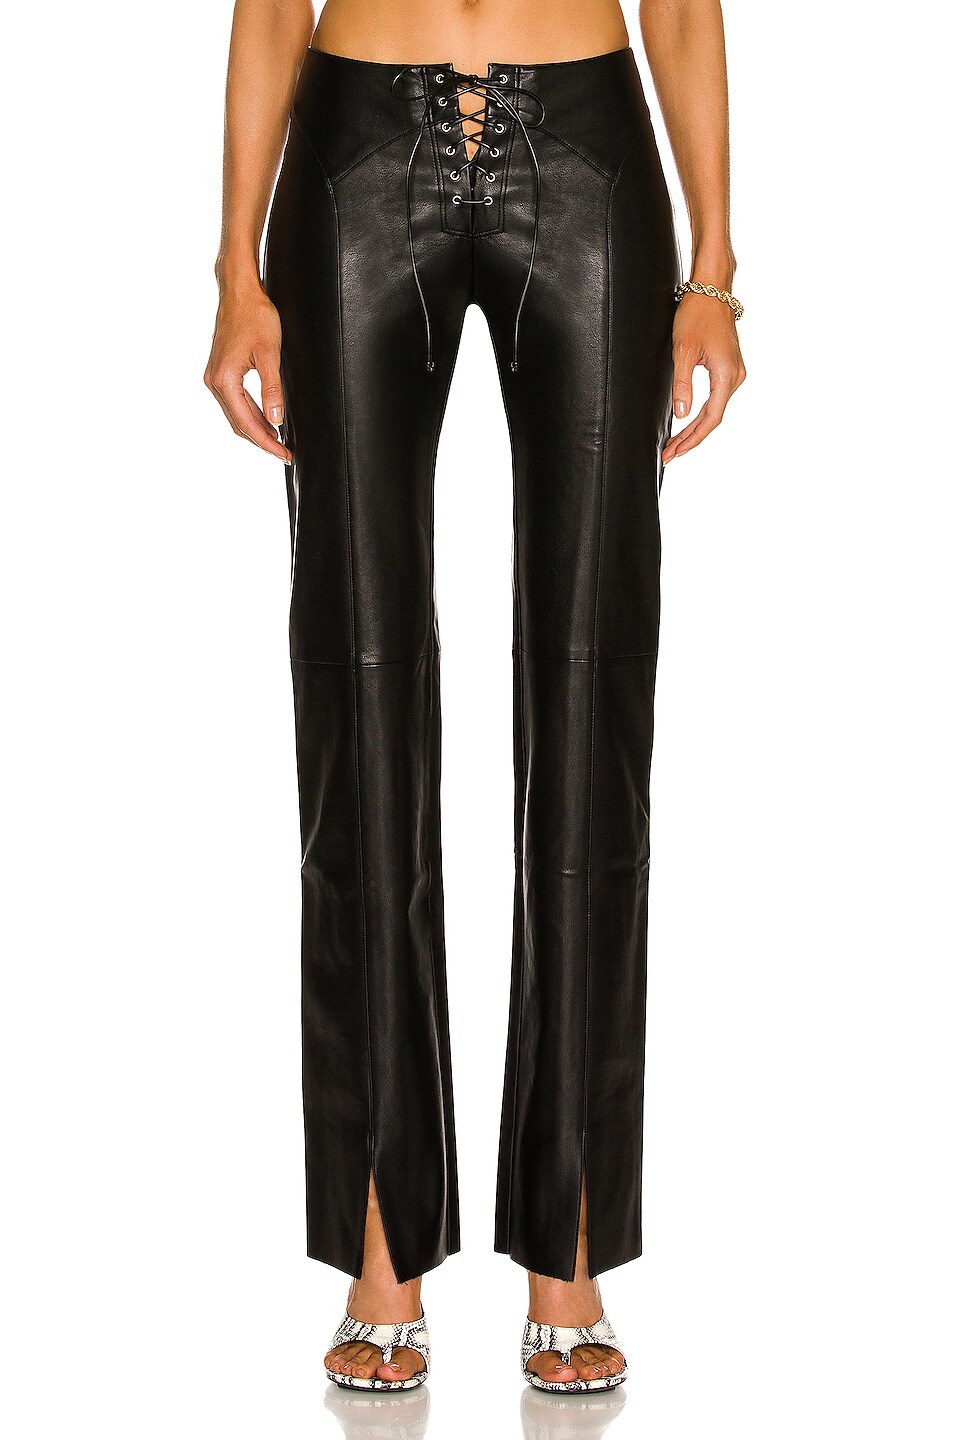 Miaou Element Lace Up Pant in Black | FWRD